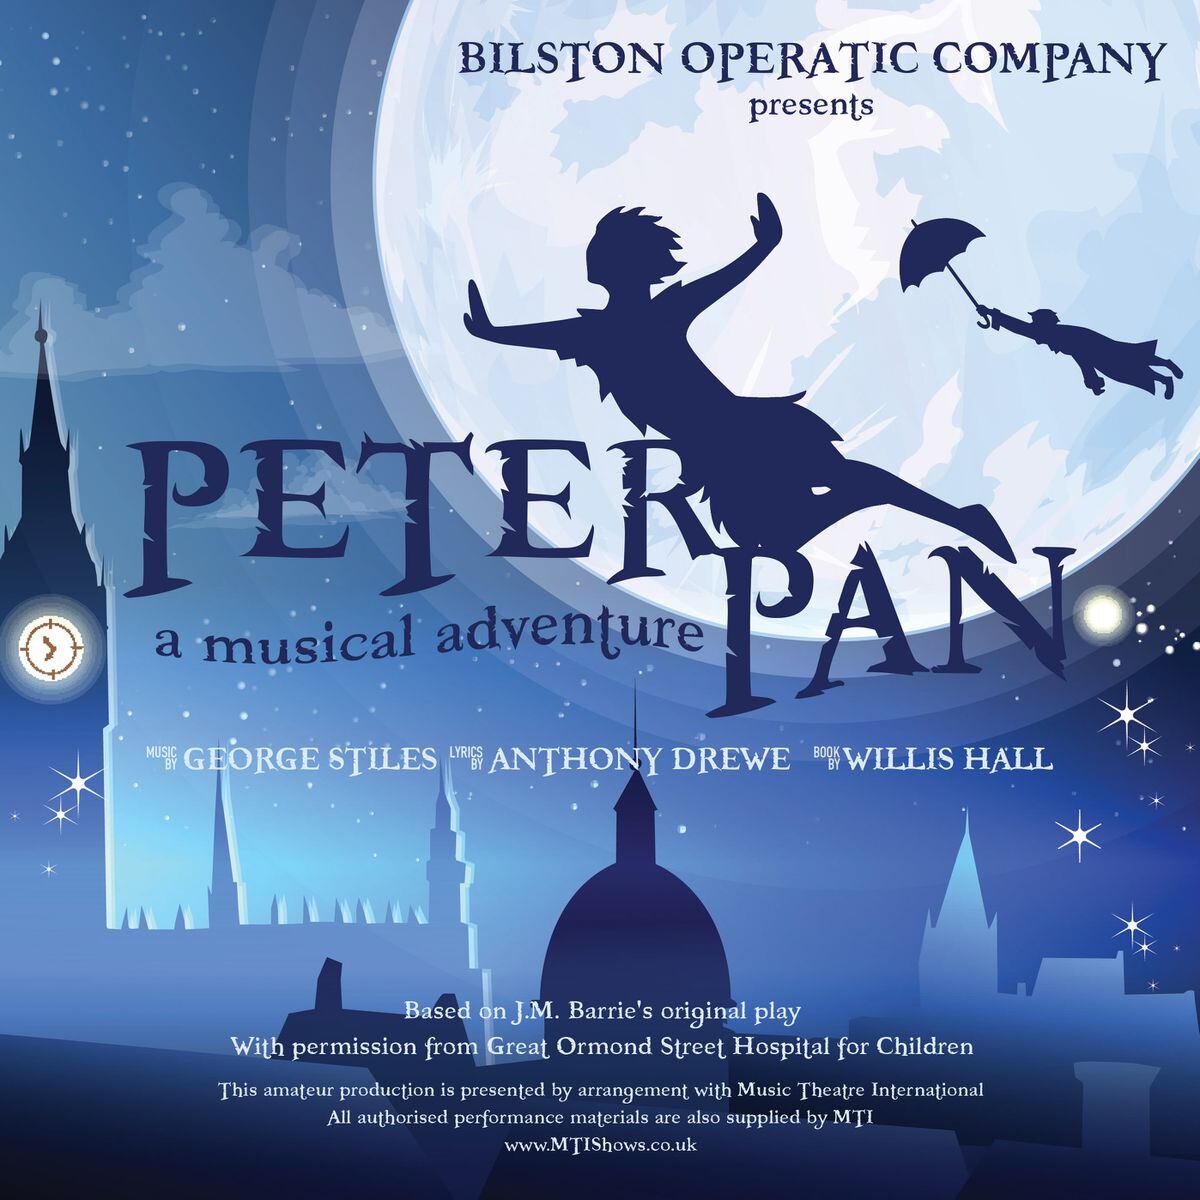 Poster for the production of Peter Pan